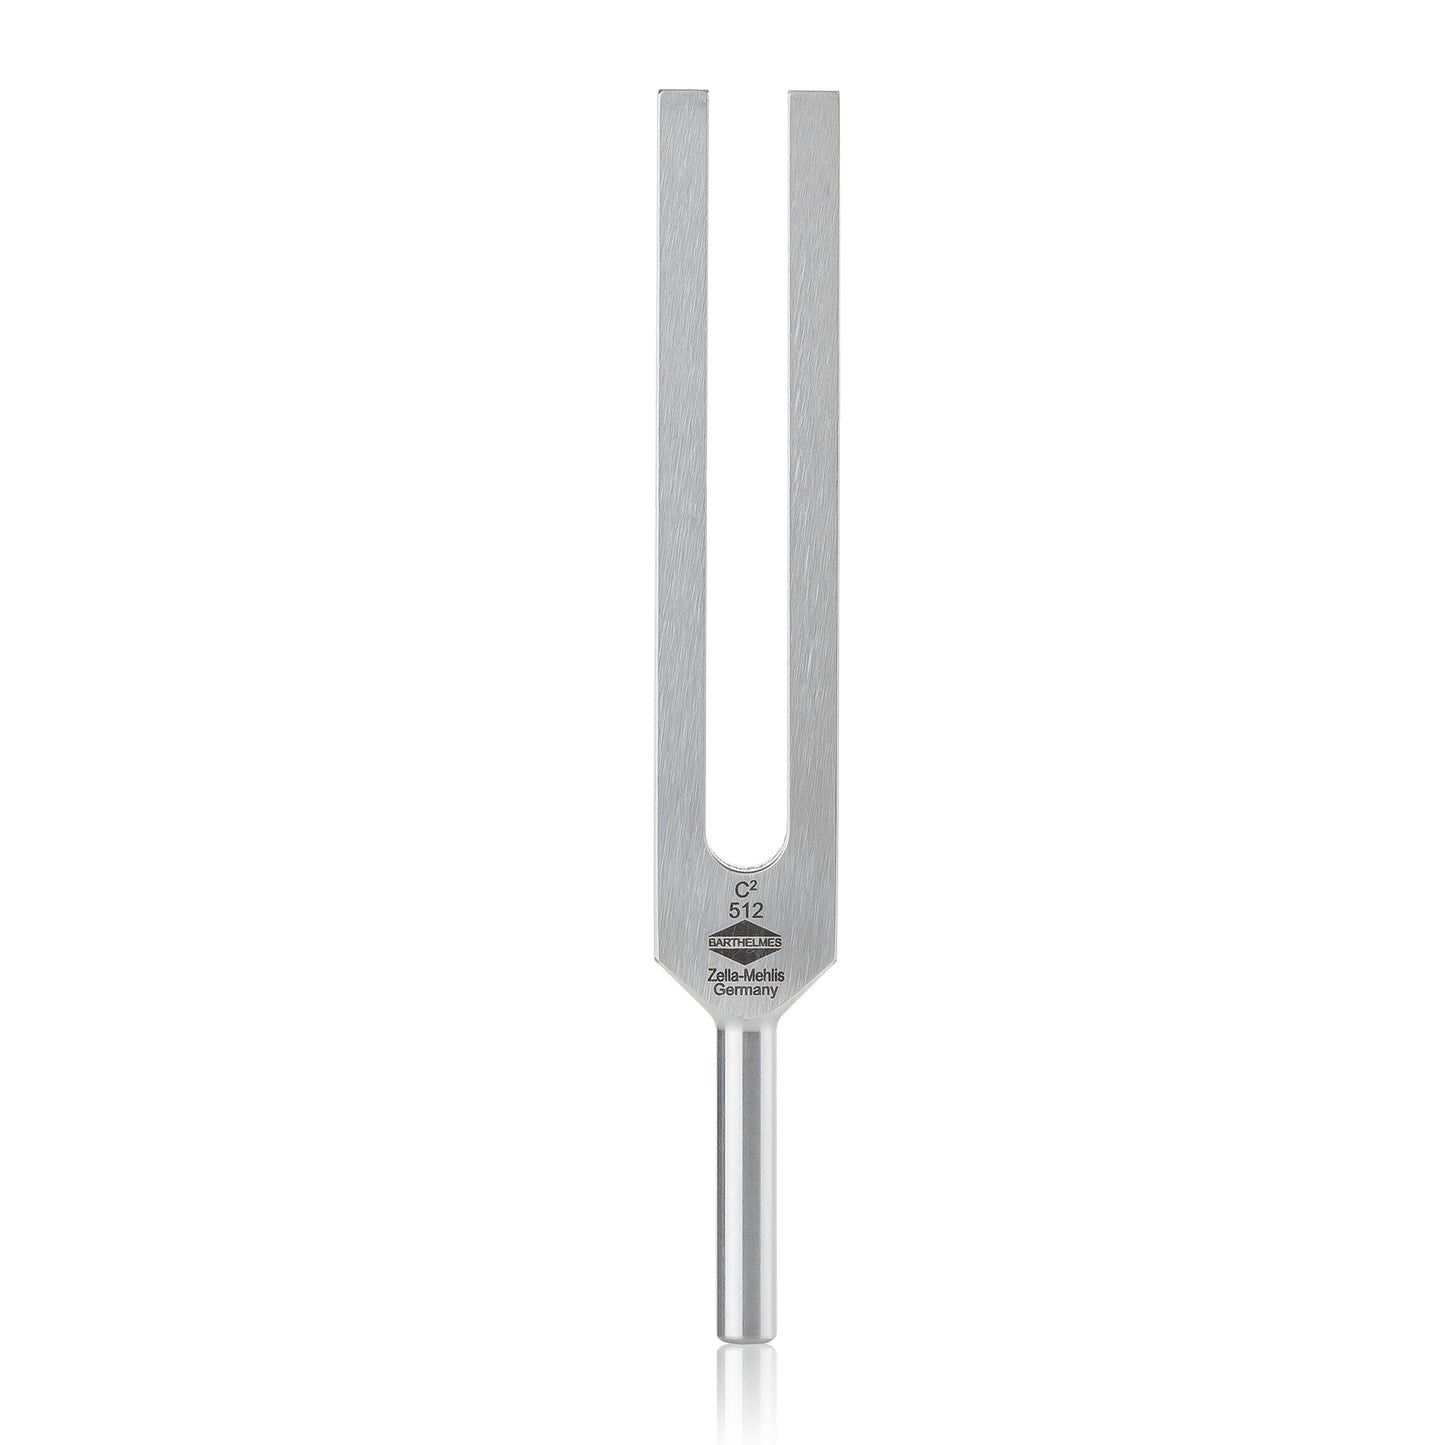 Barthelmes tuning fork c2 512 Hz for ear doctors made of light metal